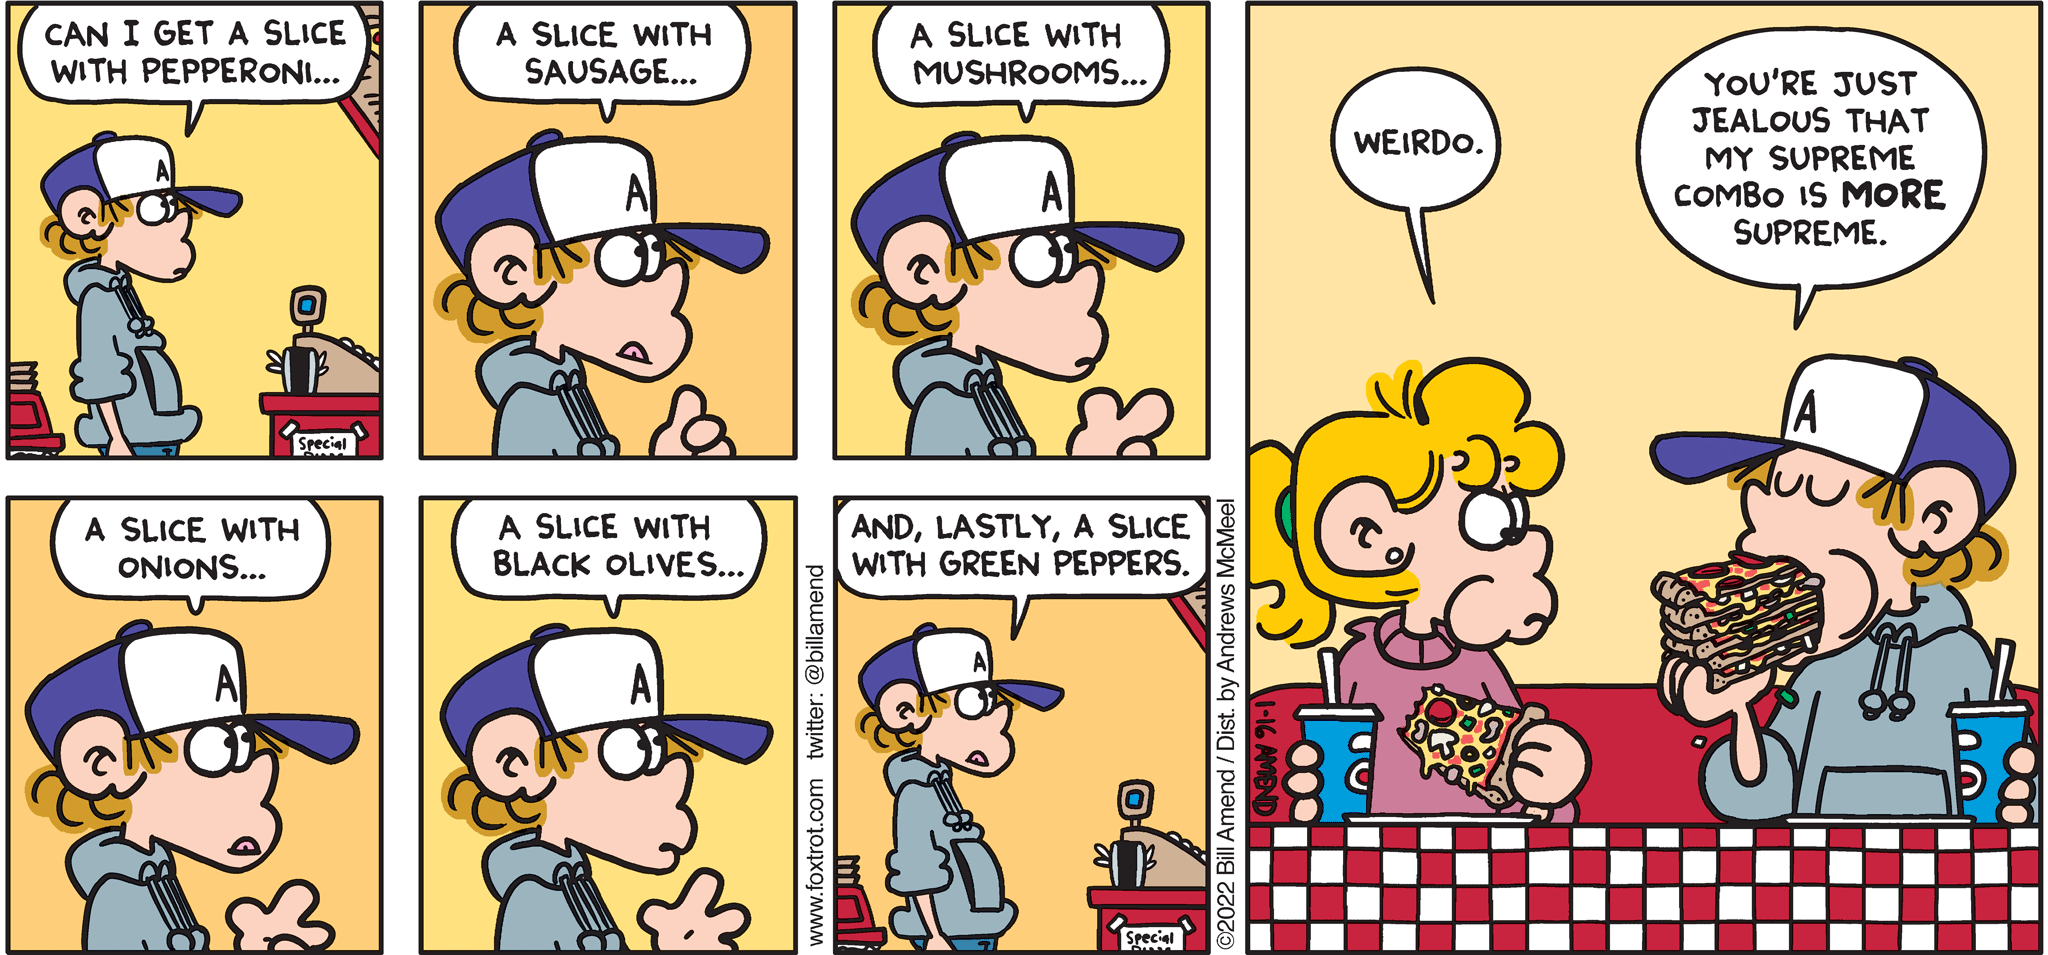 FoxTrot comic strip by Bill Amend - "Supreme Combo" published January 16, 2022 - Transcript: Peter Fox: Can I get a slice with pepperoni... A slice with sausage... A slice with mushrooms... A slice with onions... A slice with black olives... And, lastly, a slice with green peppers. Paige Fox: Weirdo. Peter Fox: You're just jealous that my supreme combo is MORE supreme.